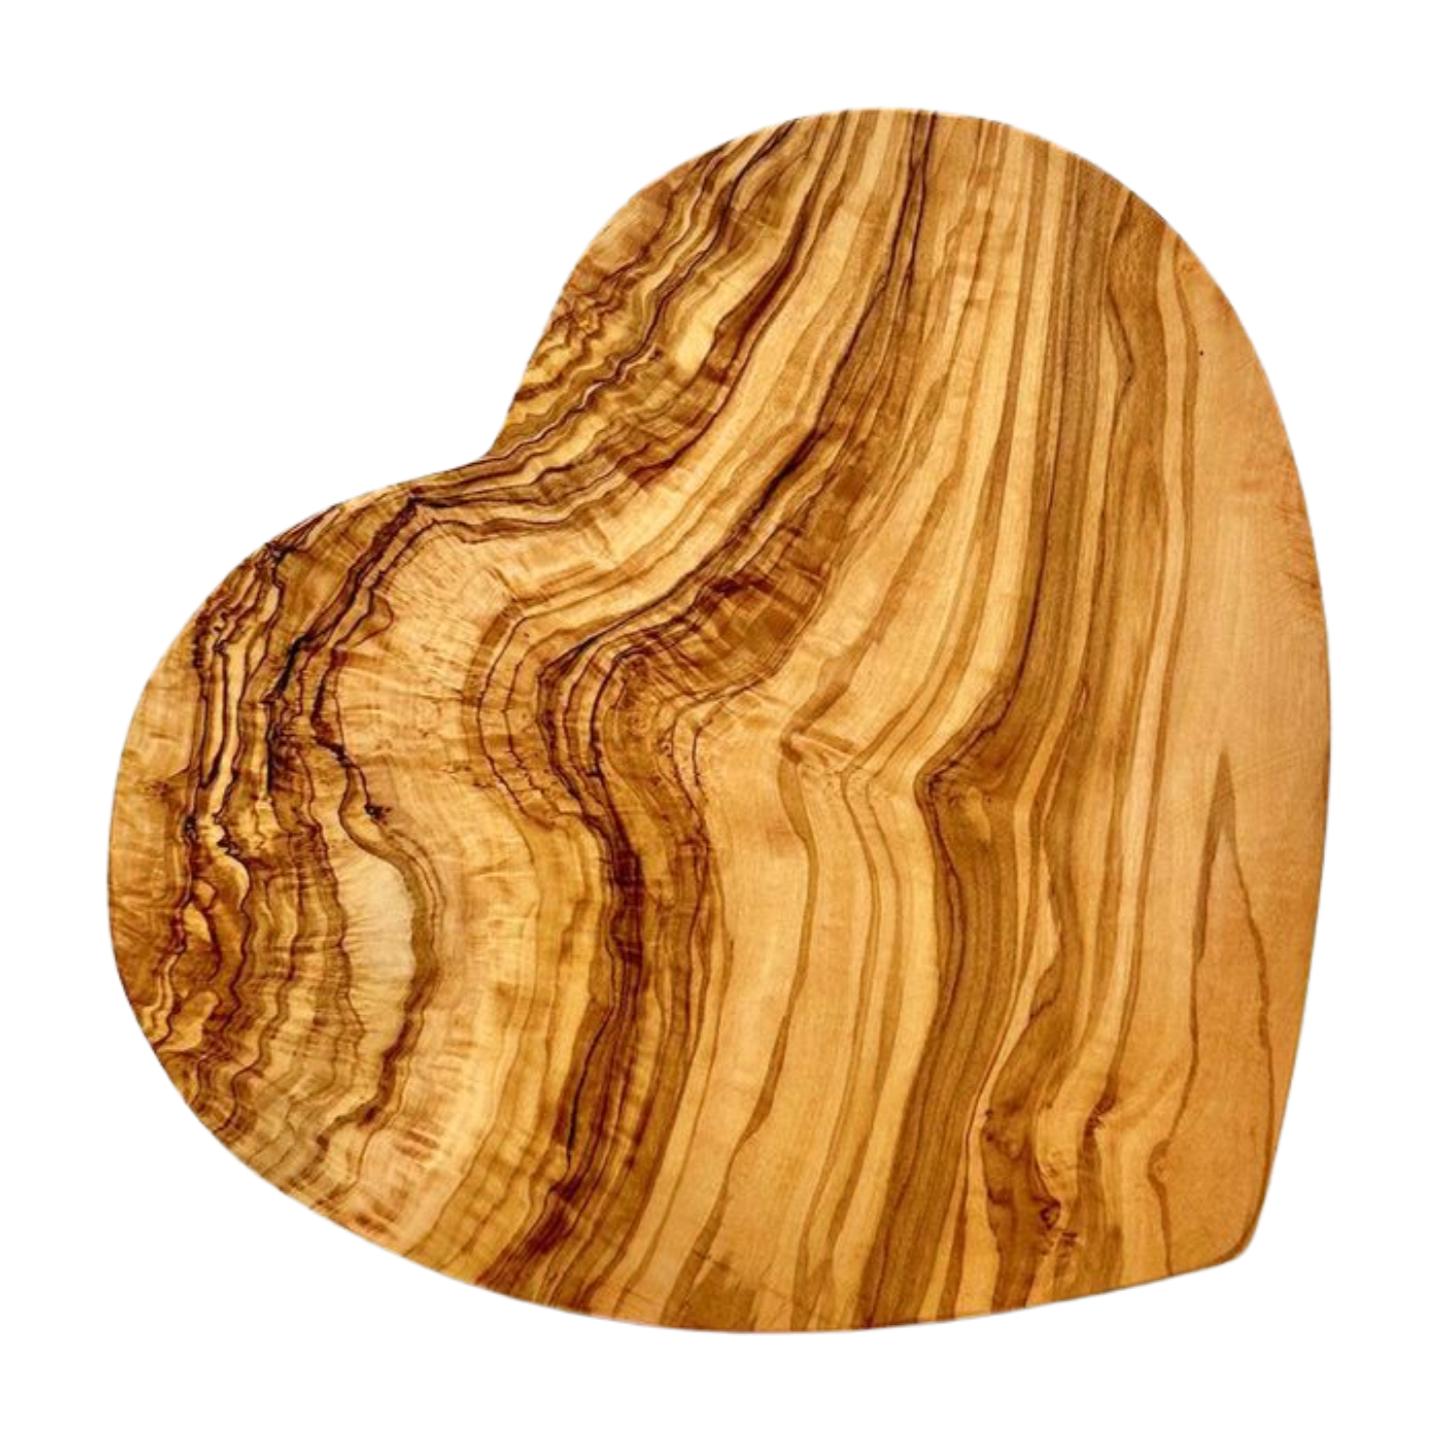 Heart-shaped olive wood charcuterie board. Imported from Germany.